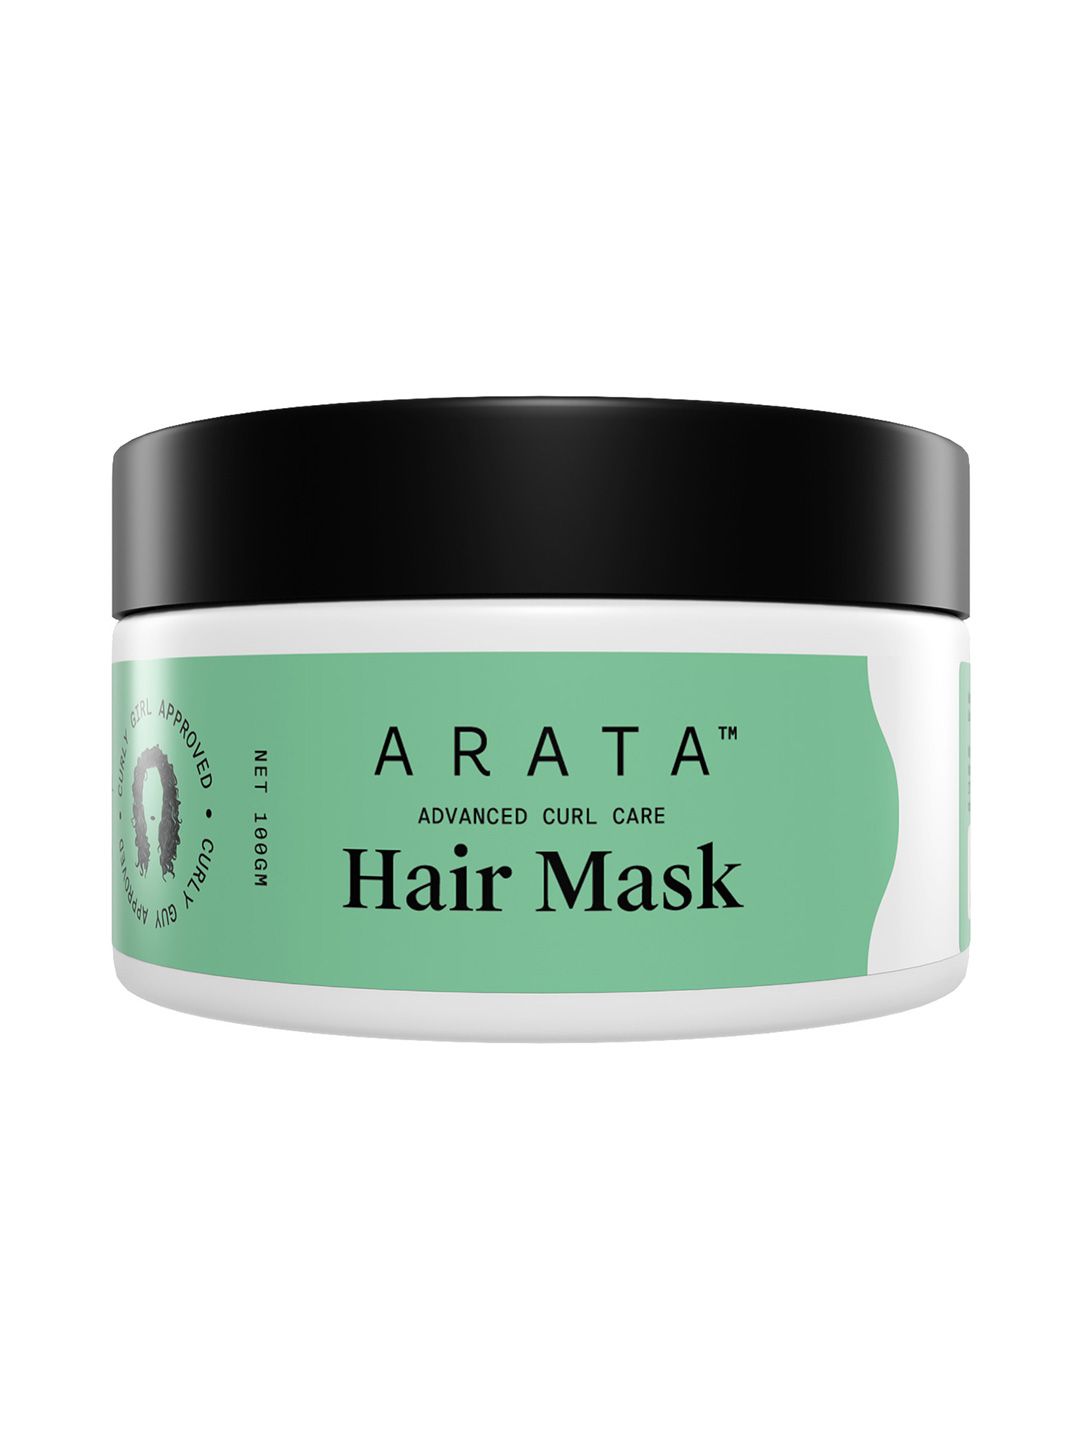 ARATA Advanced Curl Care Hair Mask for Intensive Moisture & Strength Control - 100 g Price in India